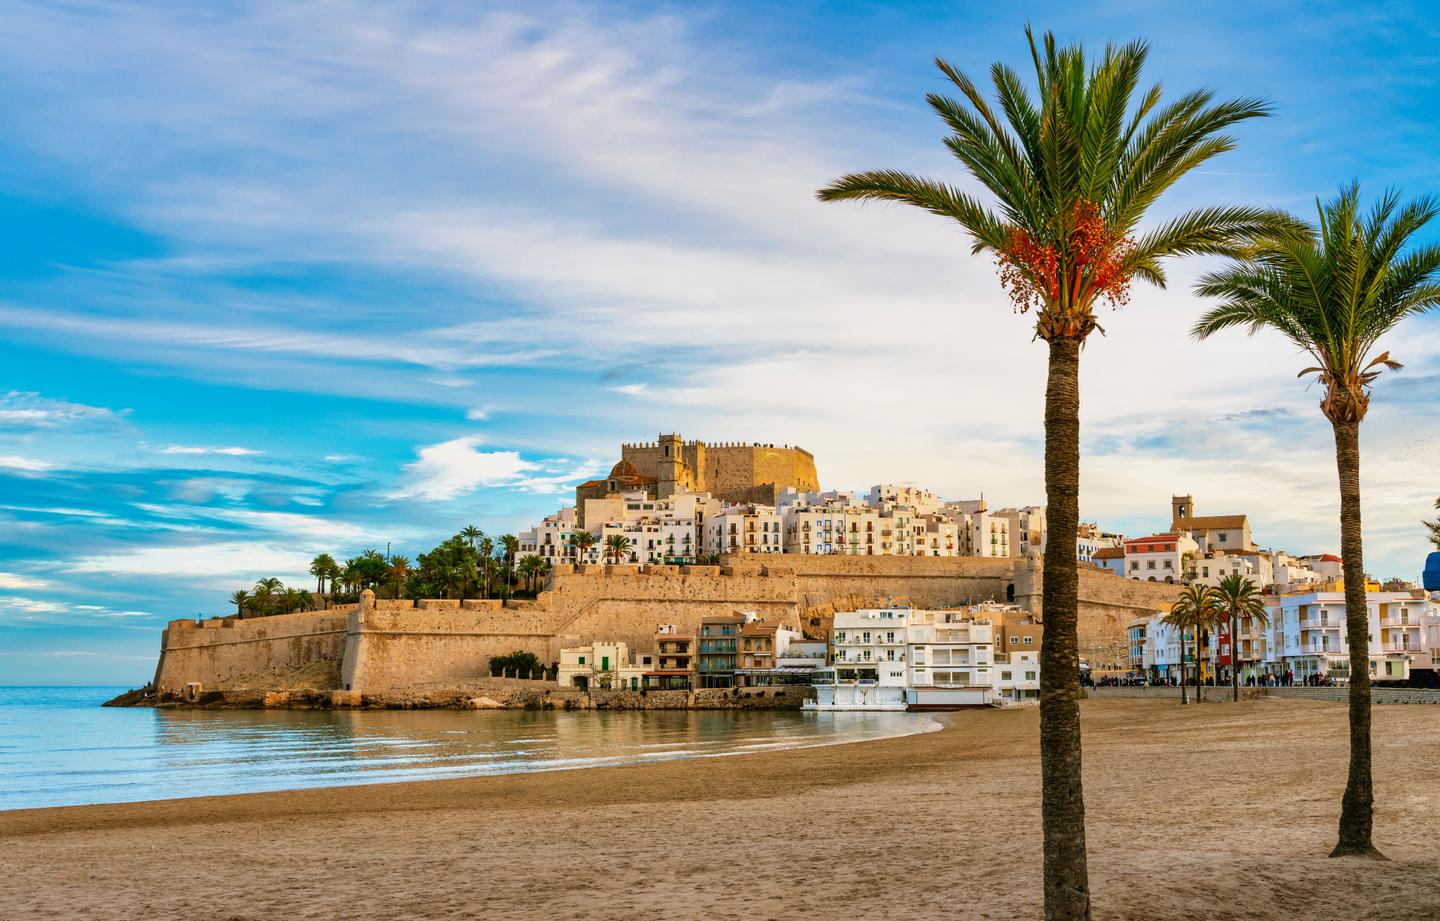 The historic fortress of Peñíscola in Castellón, Spain, standing majestically on a rocky headland. The sandy beach and palm trees in the foreground contrast with the ancient walls and whitewashed buildings, under a blue sky with scattered clouds.